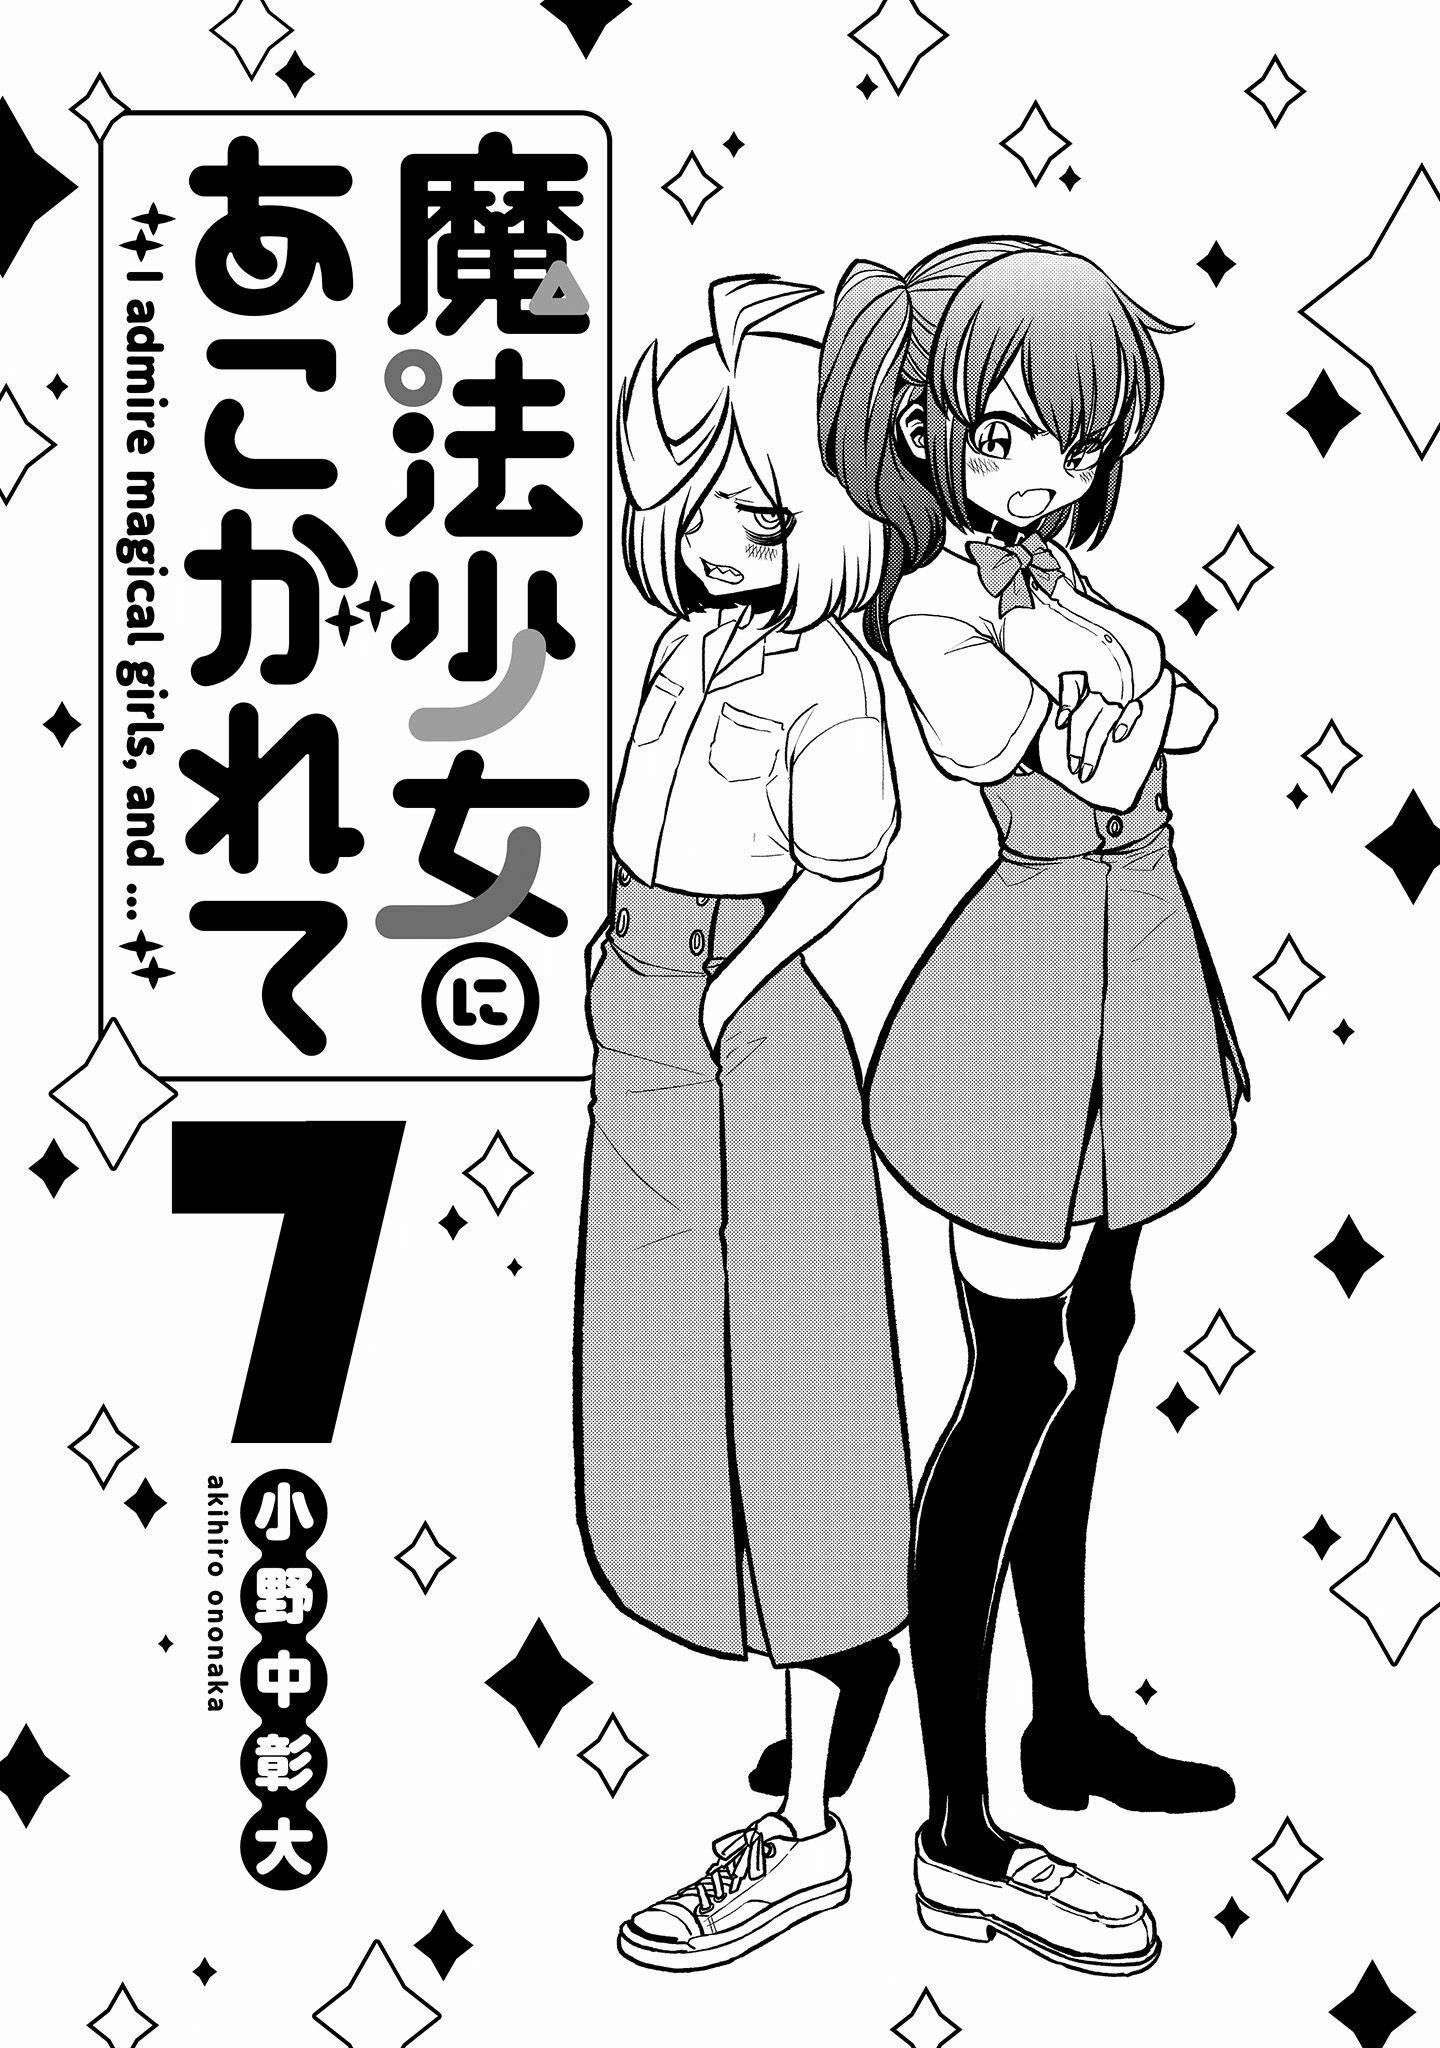 Gushing over Magical Girls - chapter 37.5 - #2